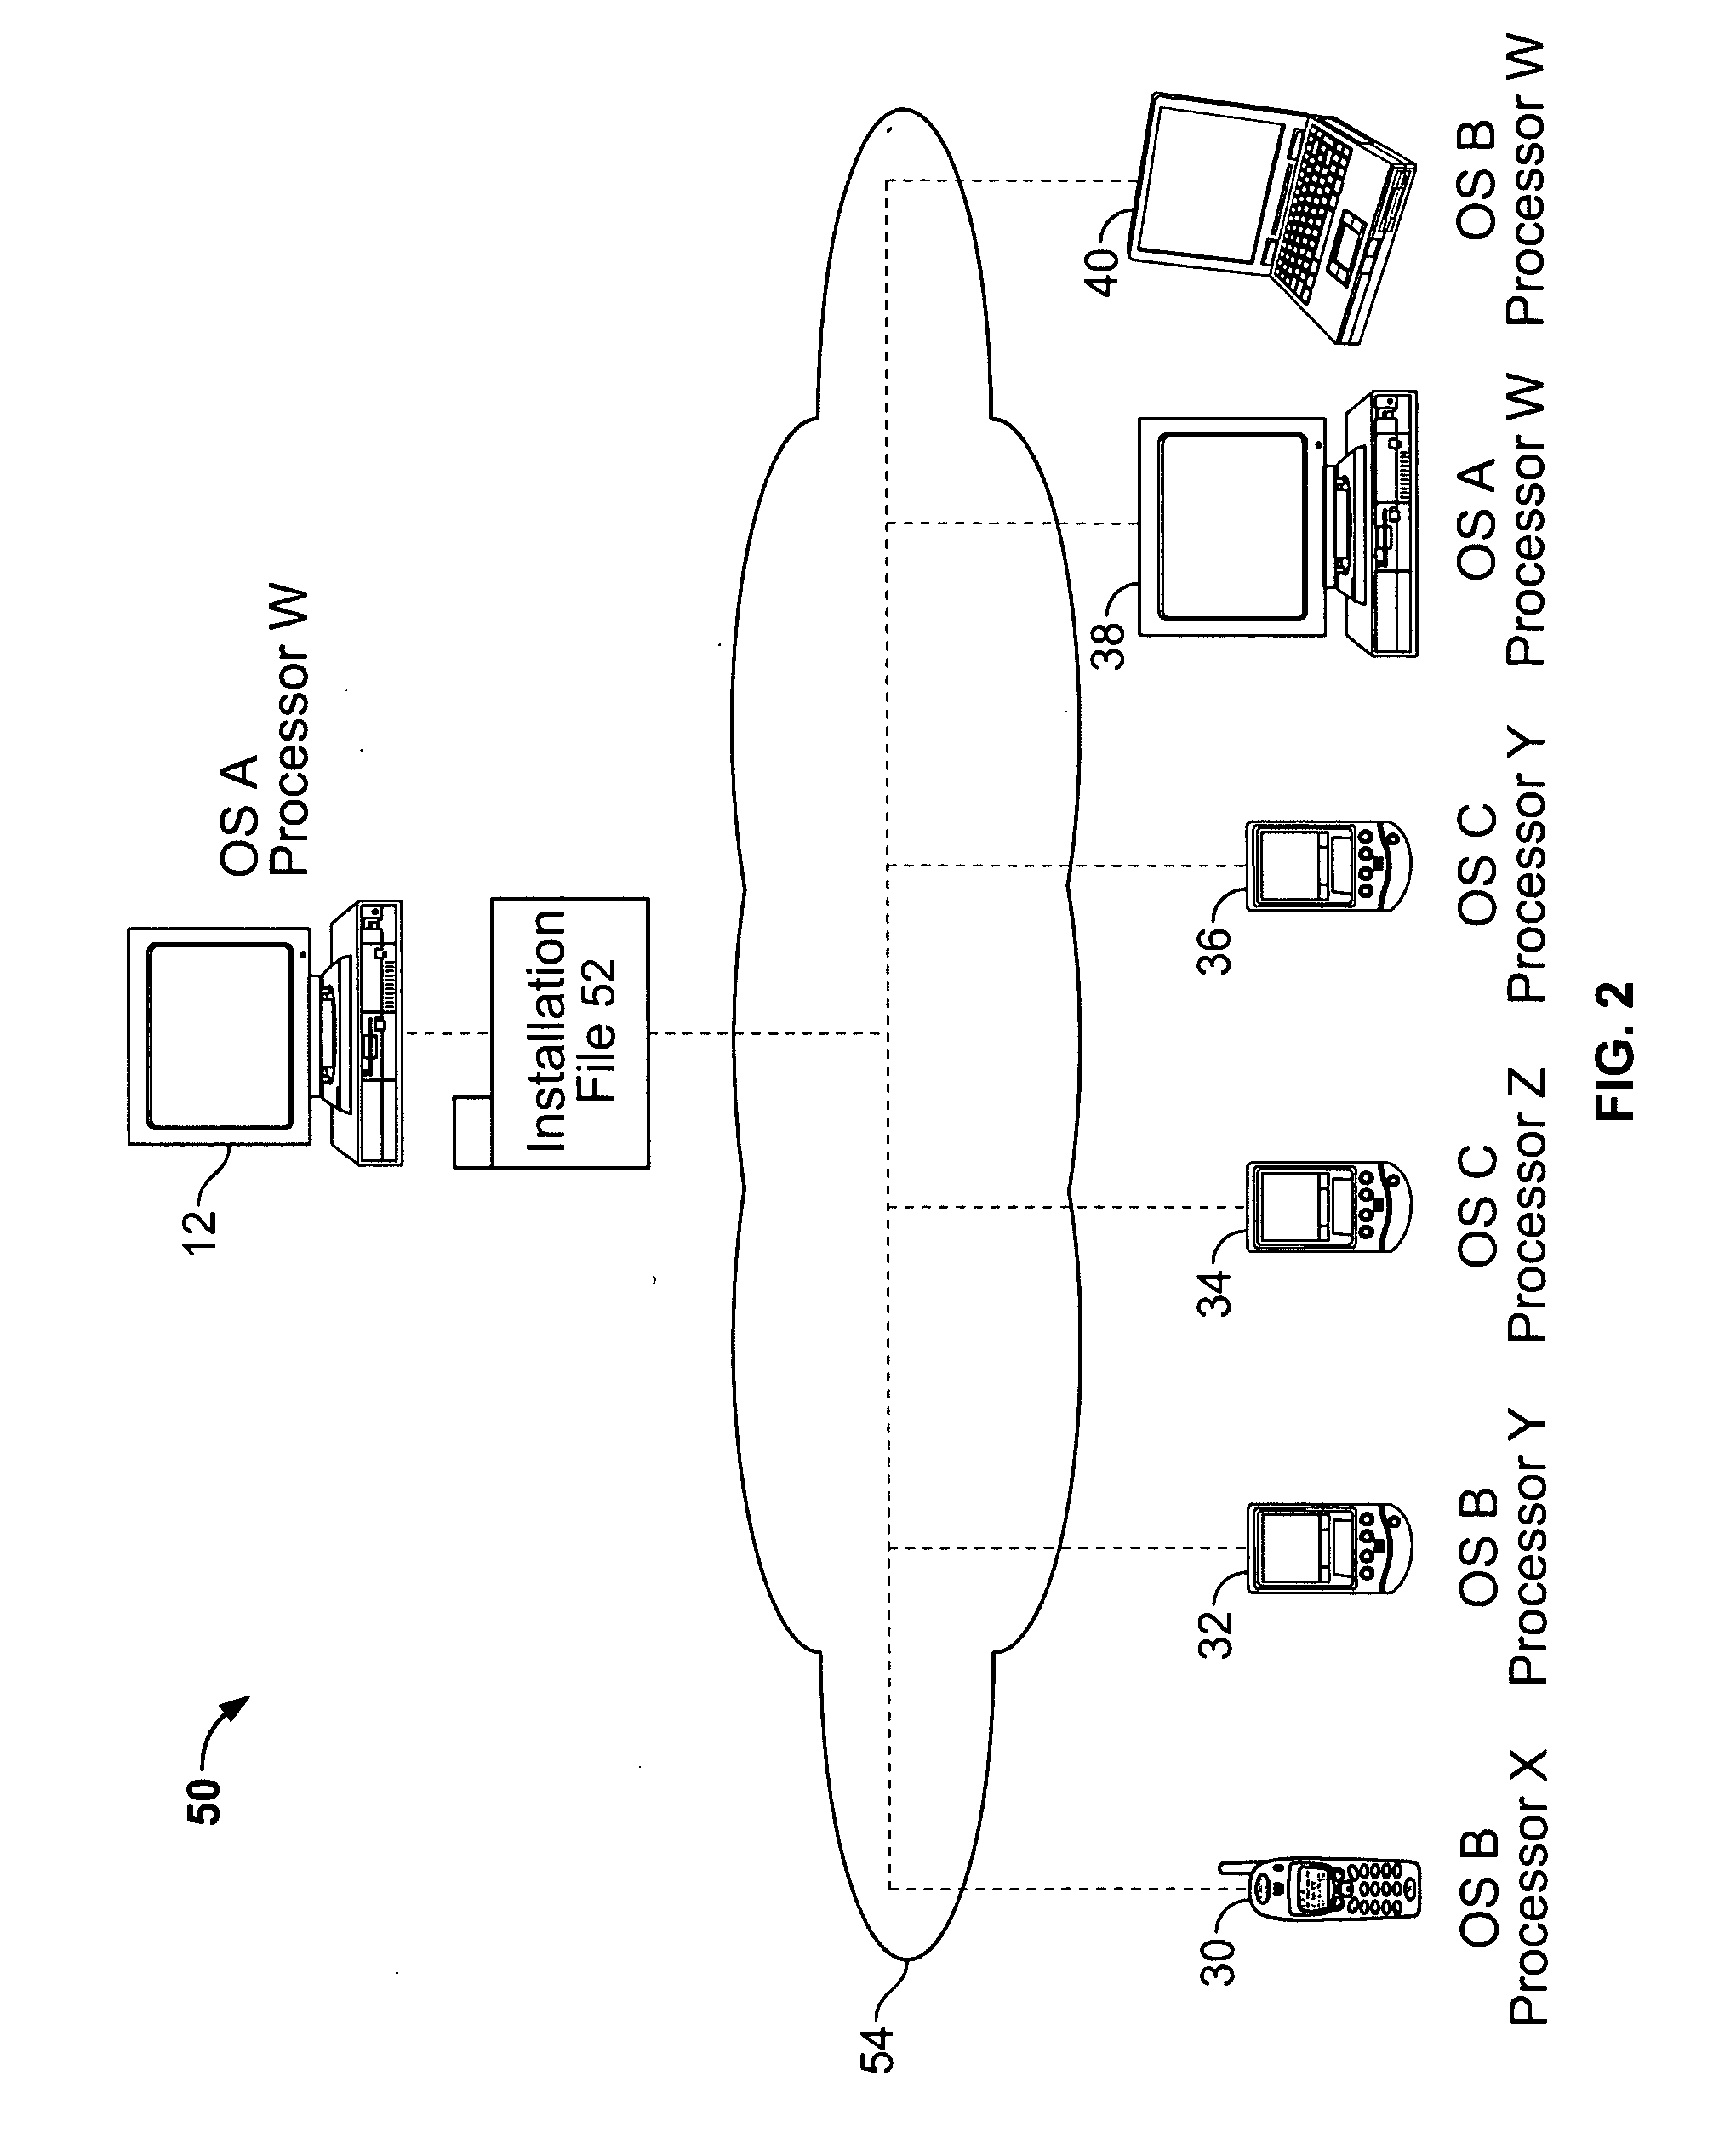 System and method for common file installation